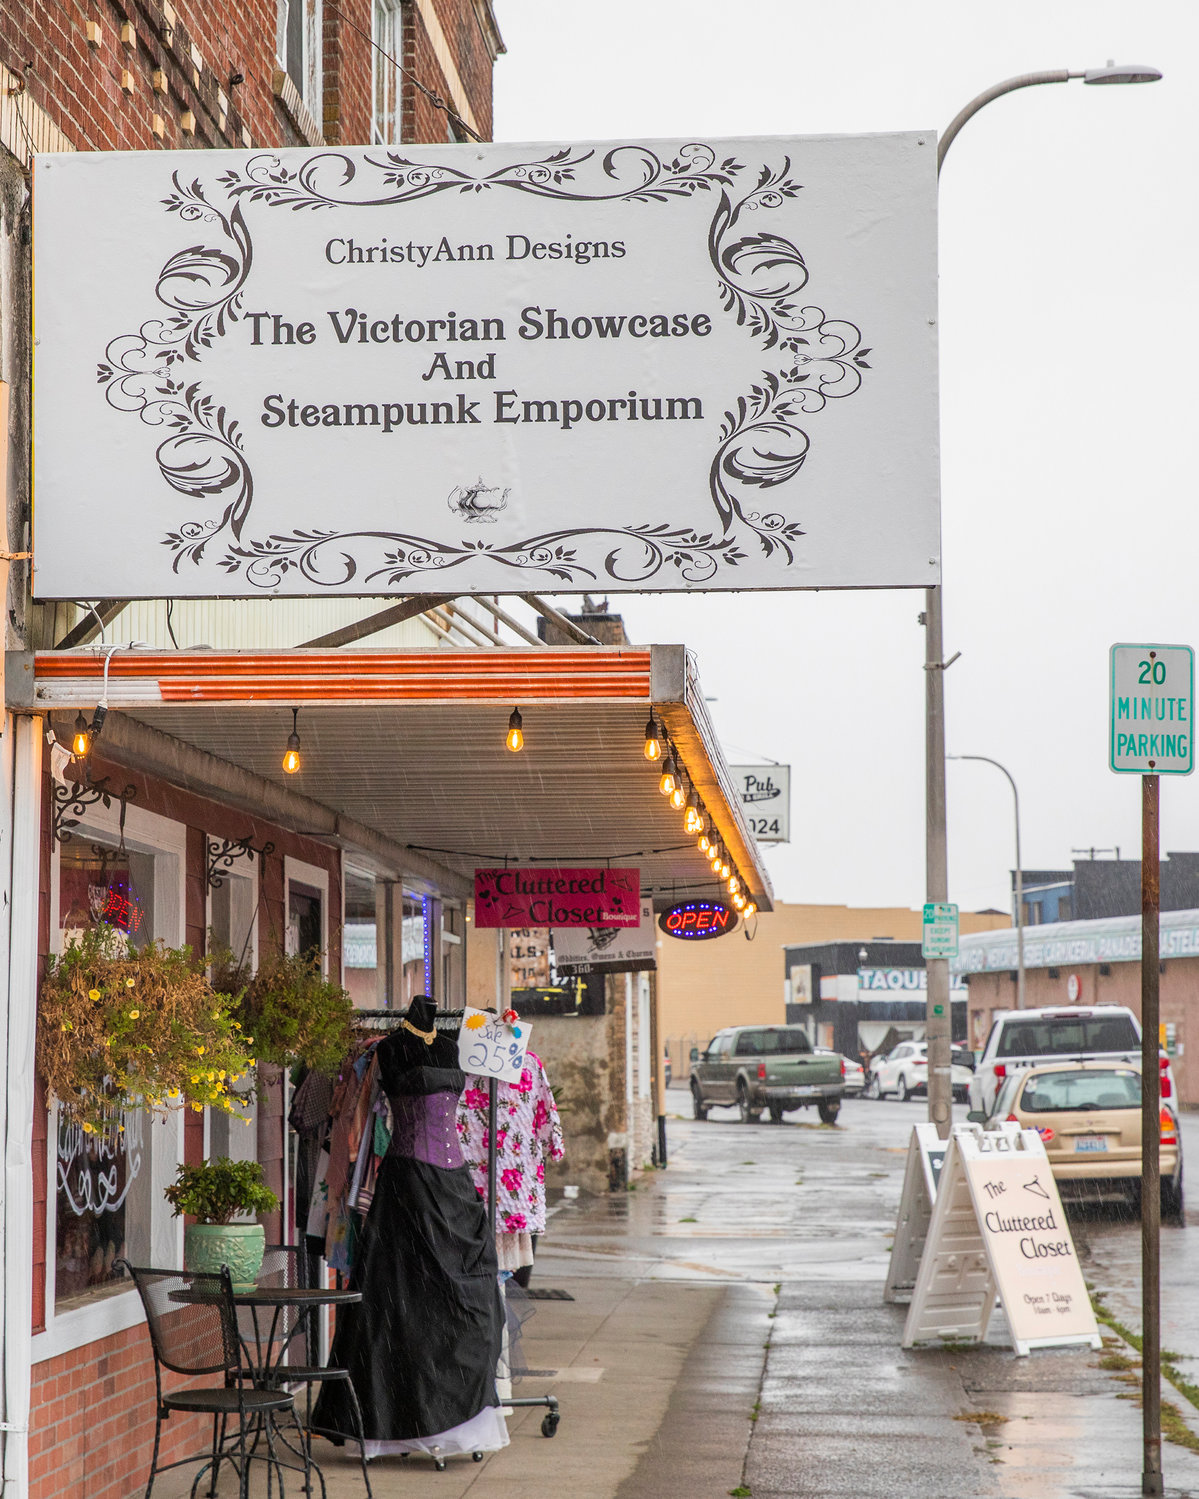 The Victorian Showcase and Steampunk Emporium is located at 529 North Tower Avenue in downtown Centralia.